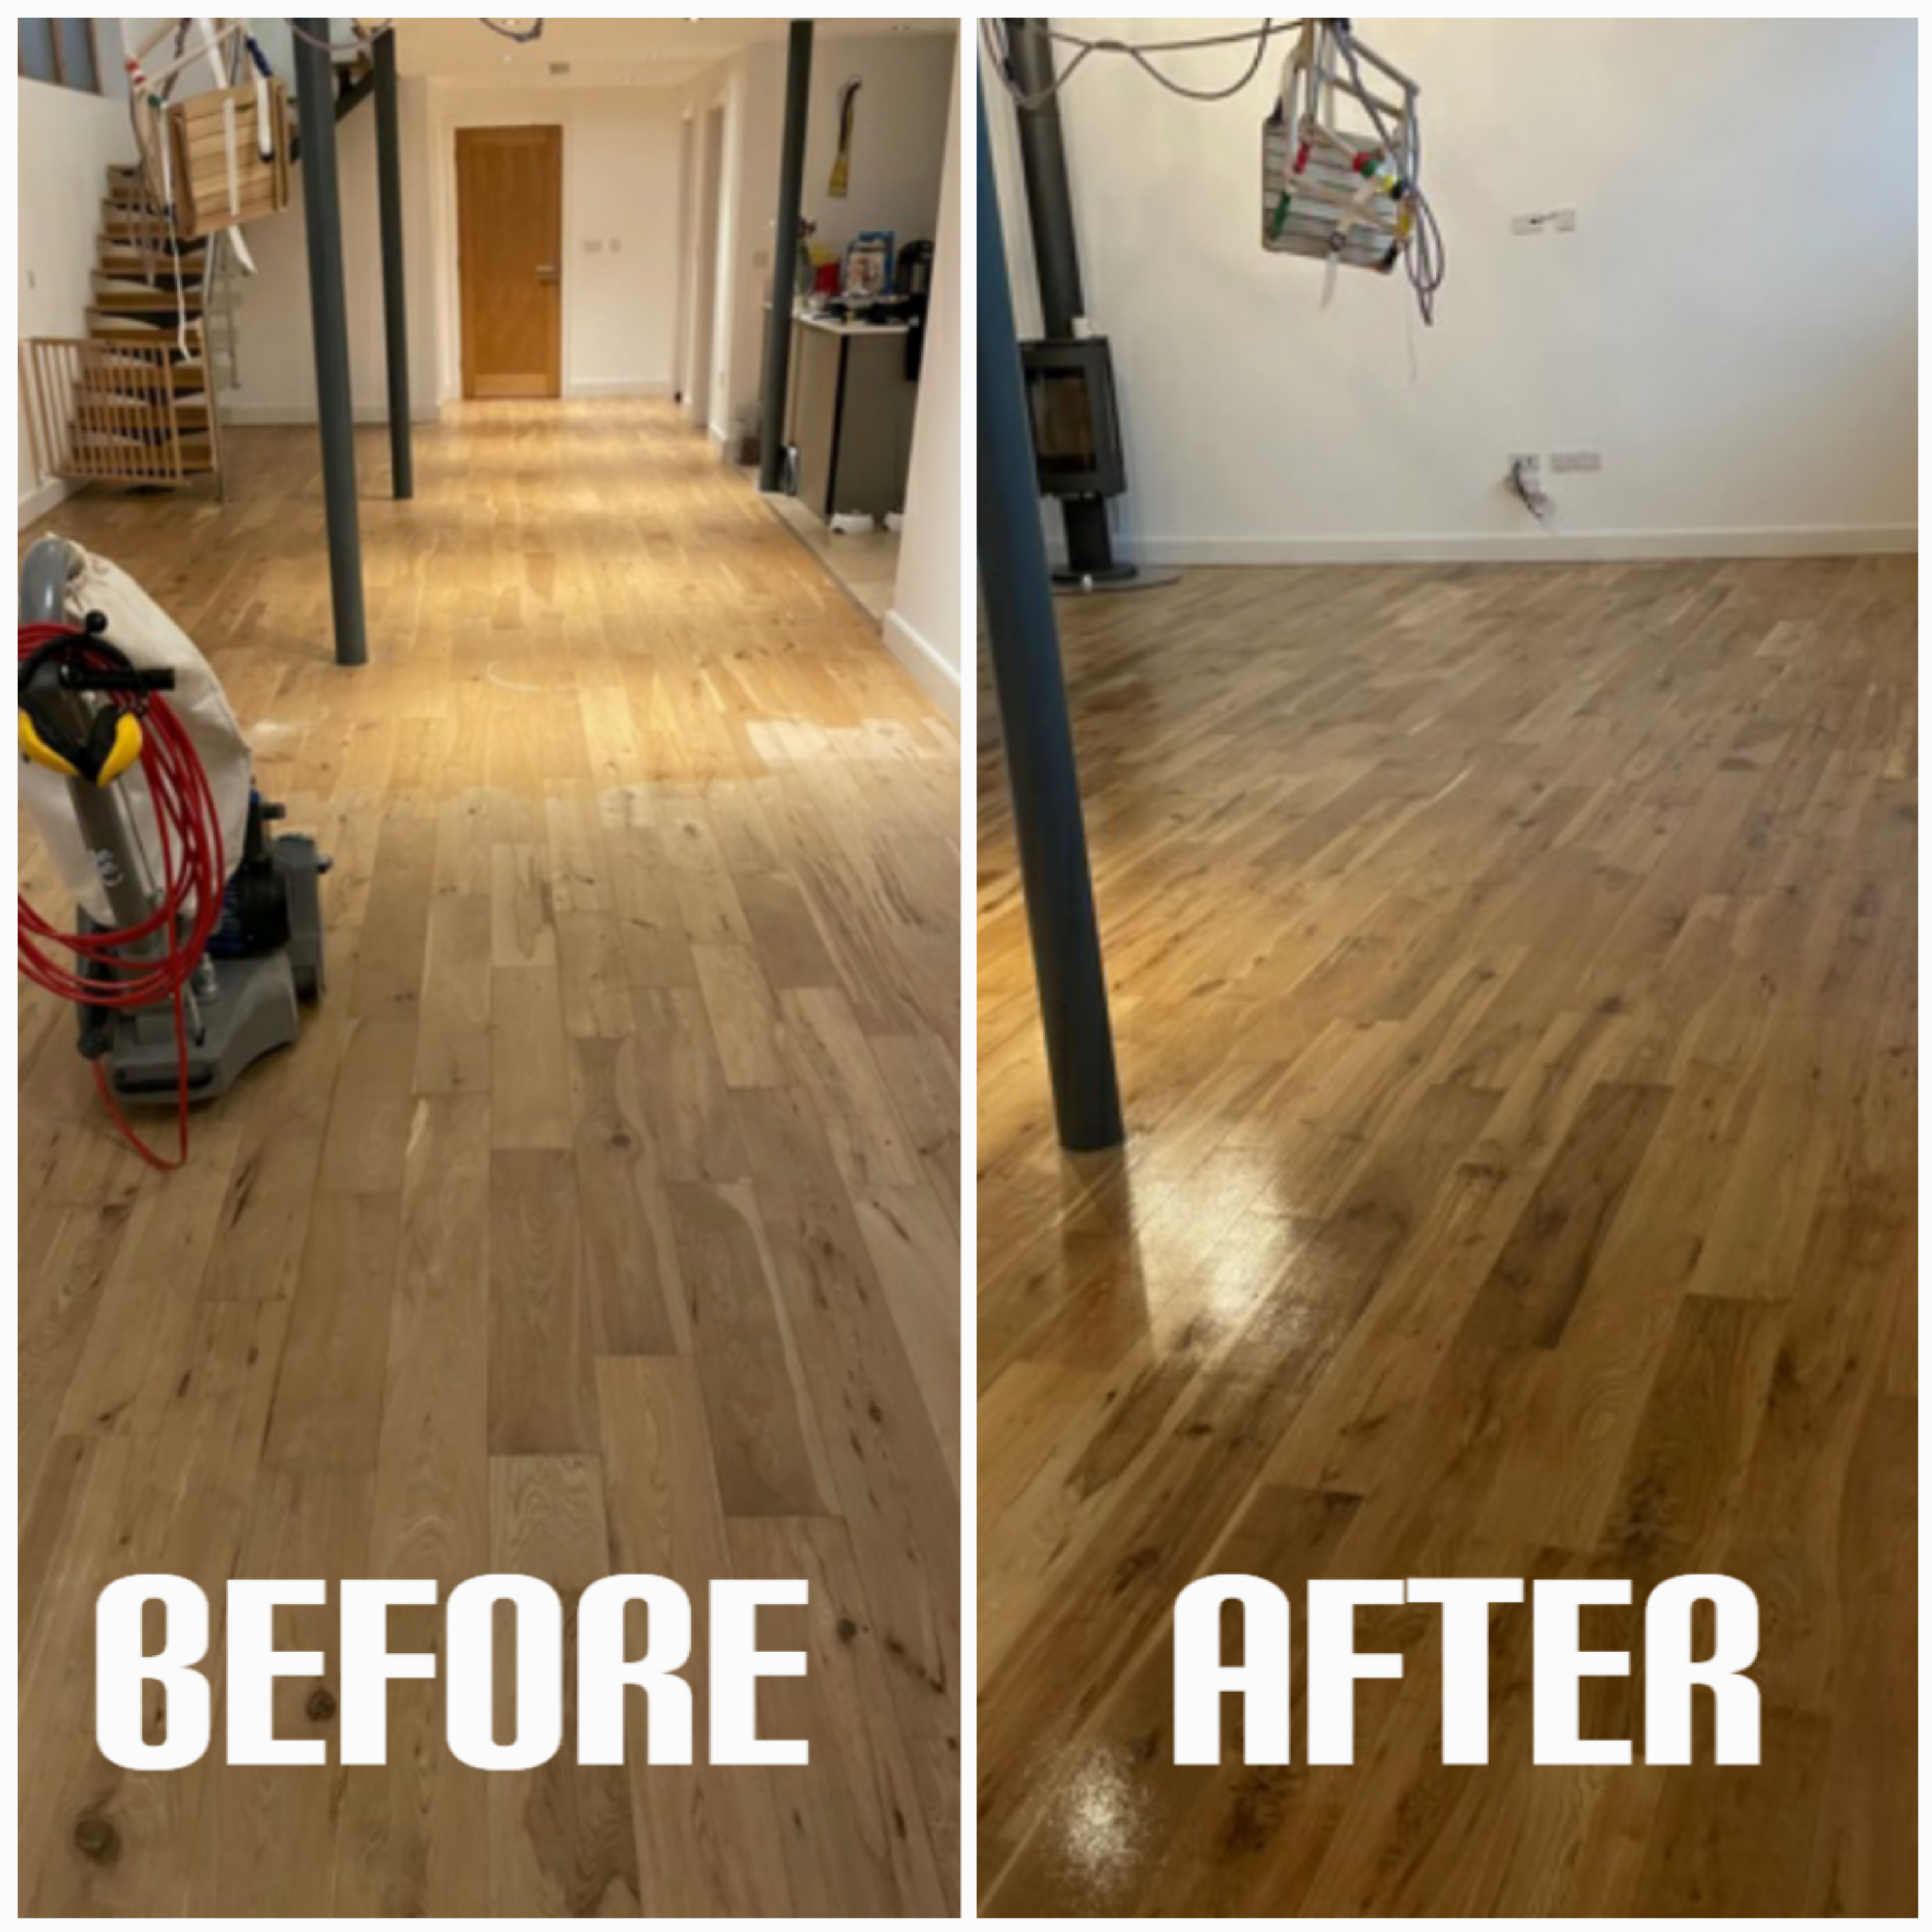 Light sanding and lacquer finish  - personal gym, Tottenham